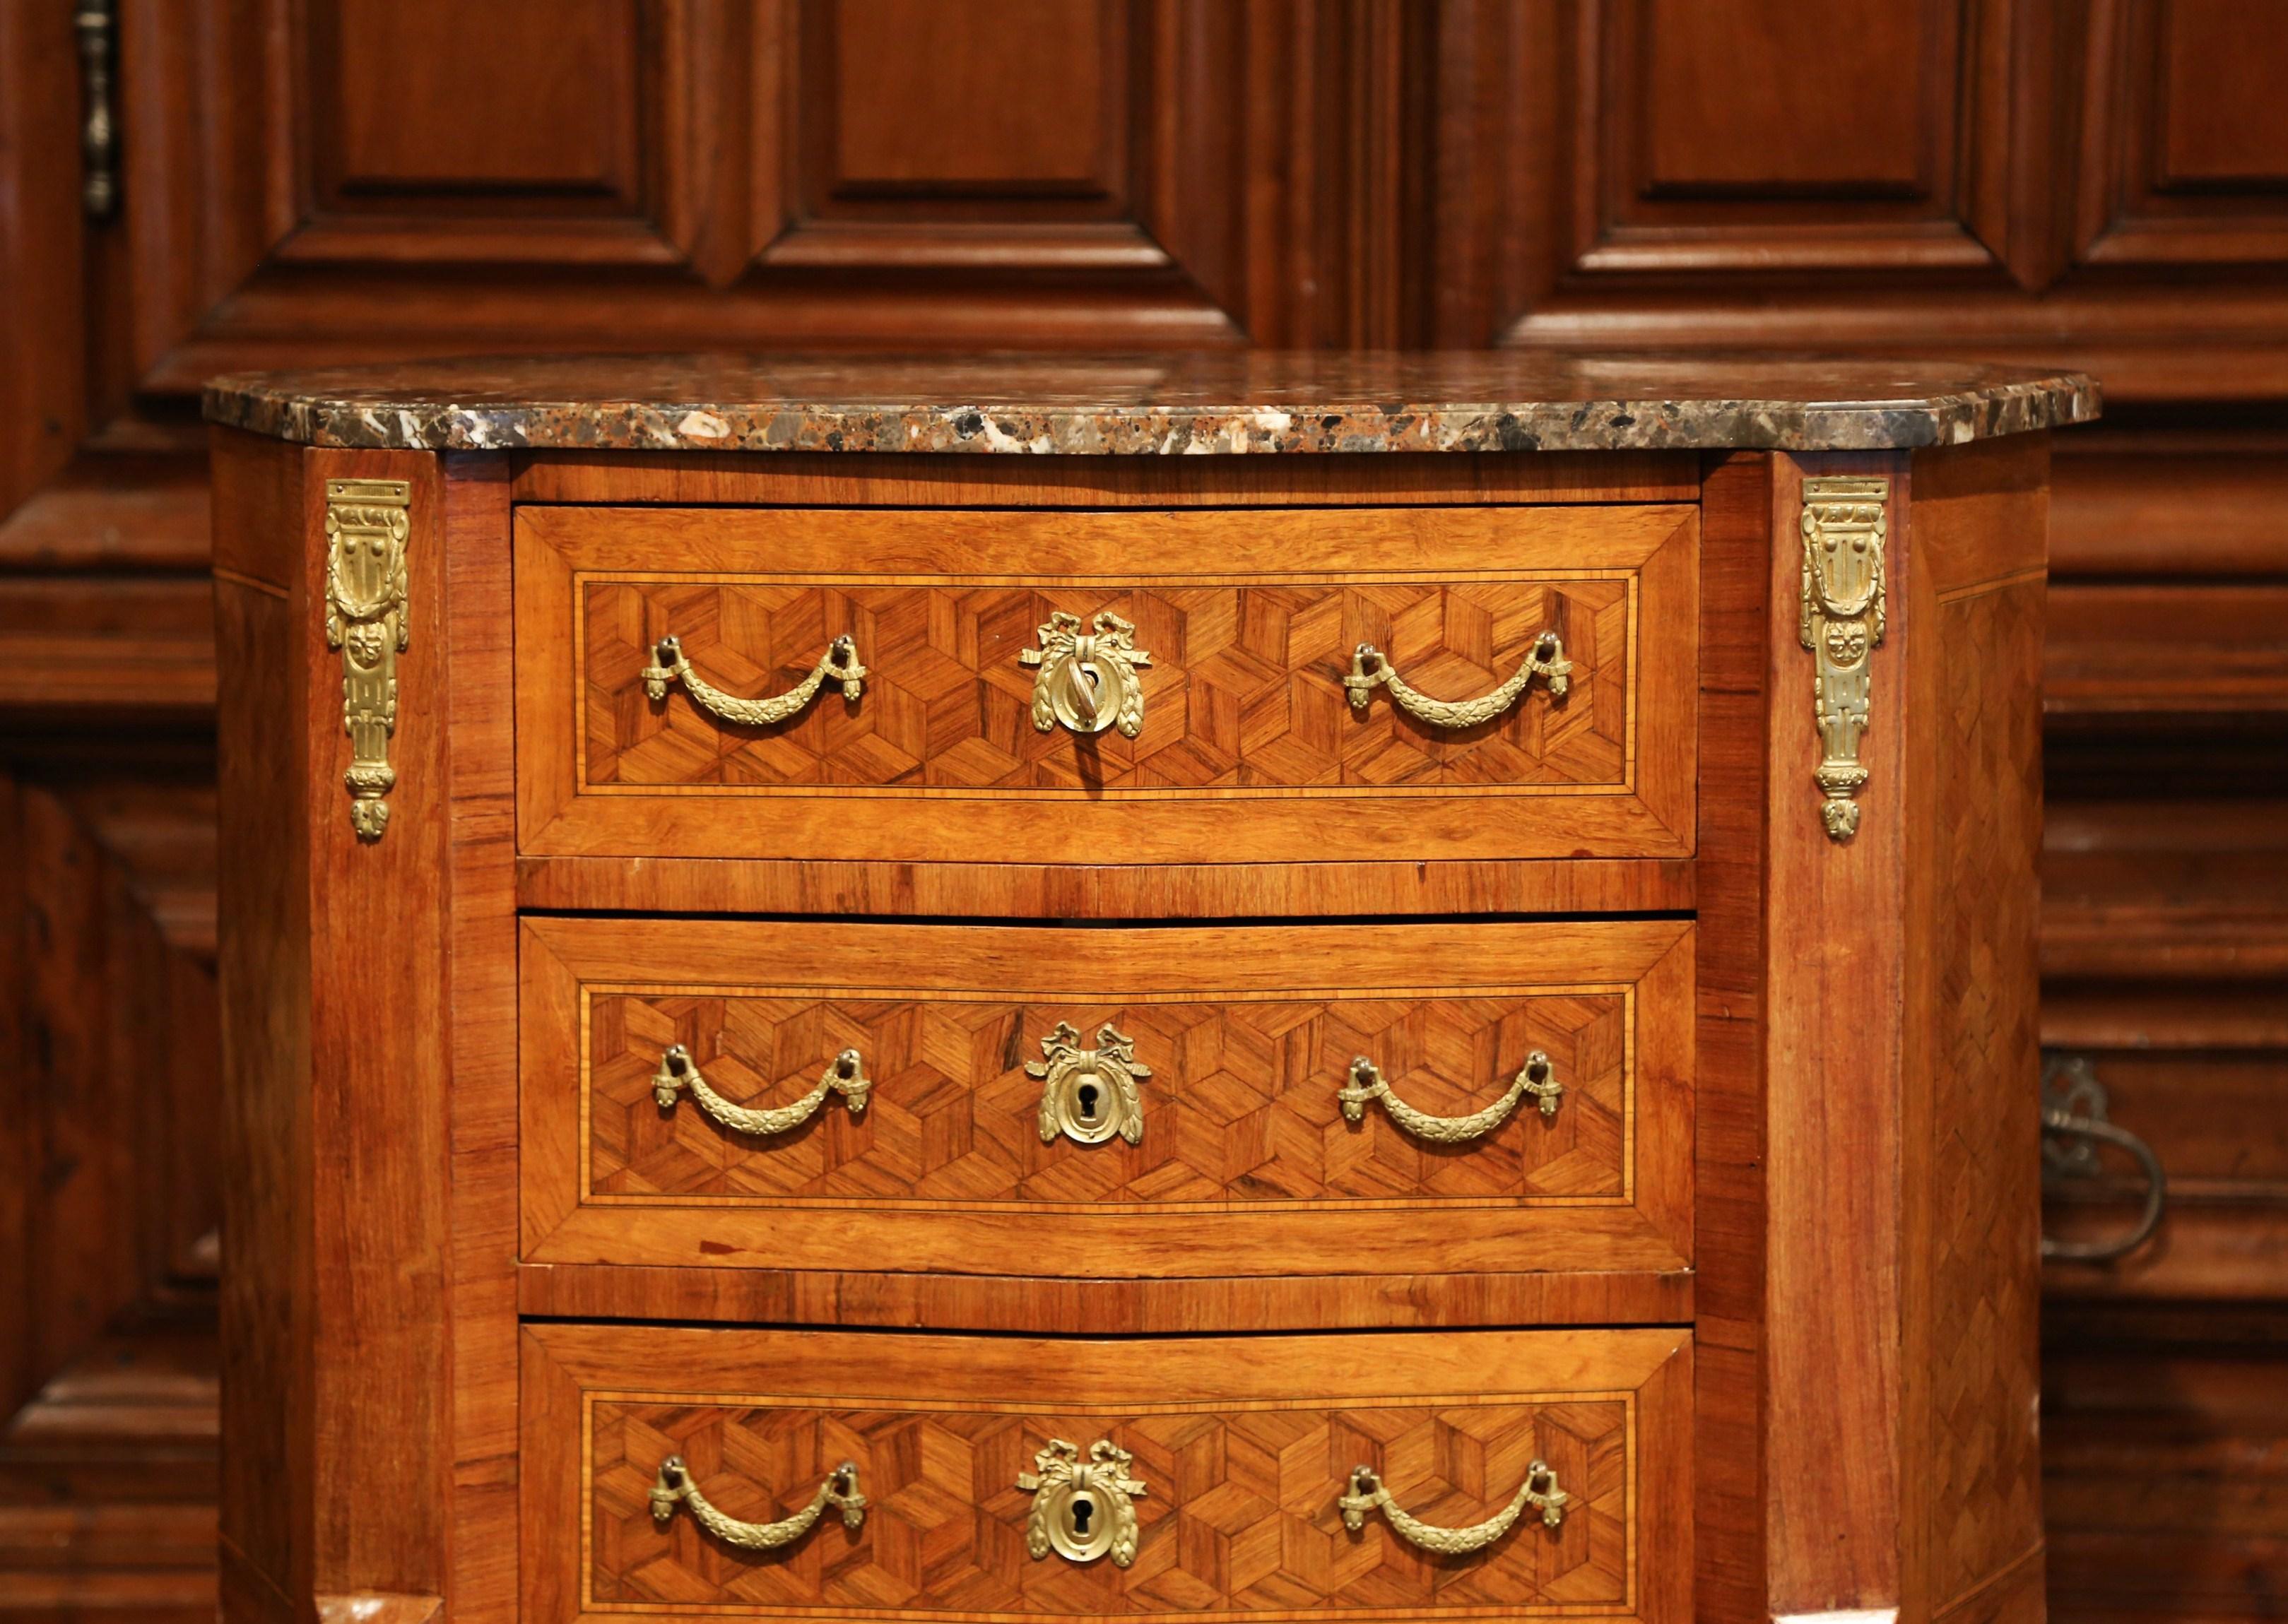 This elegant fruitwood commode is a versatile side cabinet for any room. Crafted in France, circa 1900, this sophisticated, detailed chest could be used as a bedside table, a side table beside an armchair, or as a small chest in a powder room or an